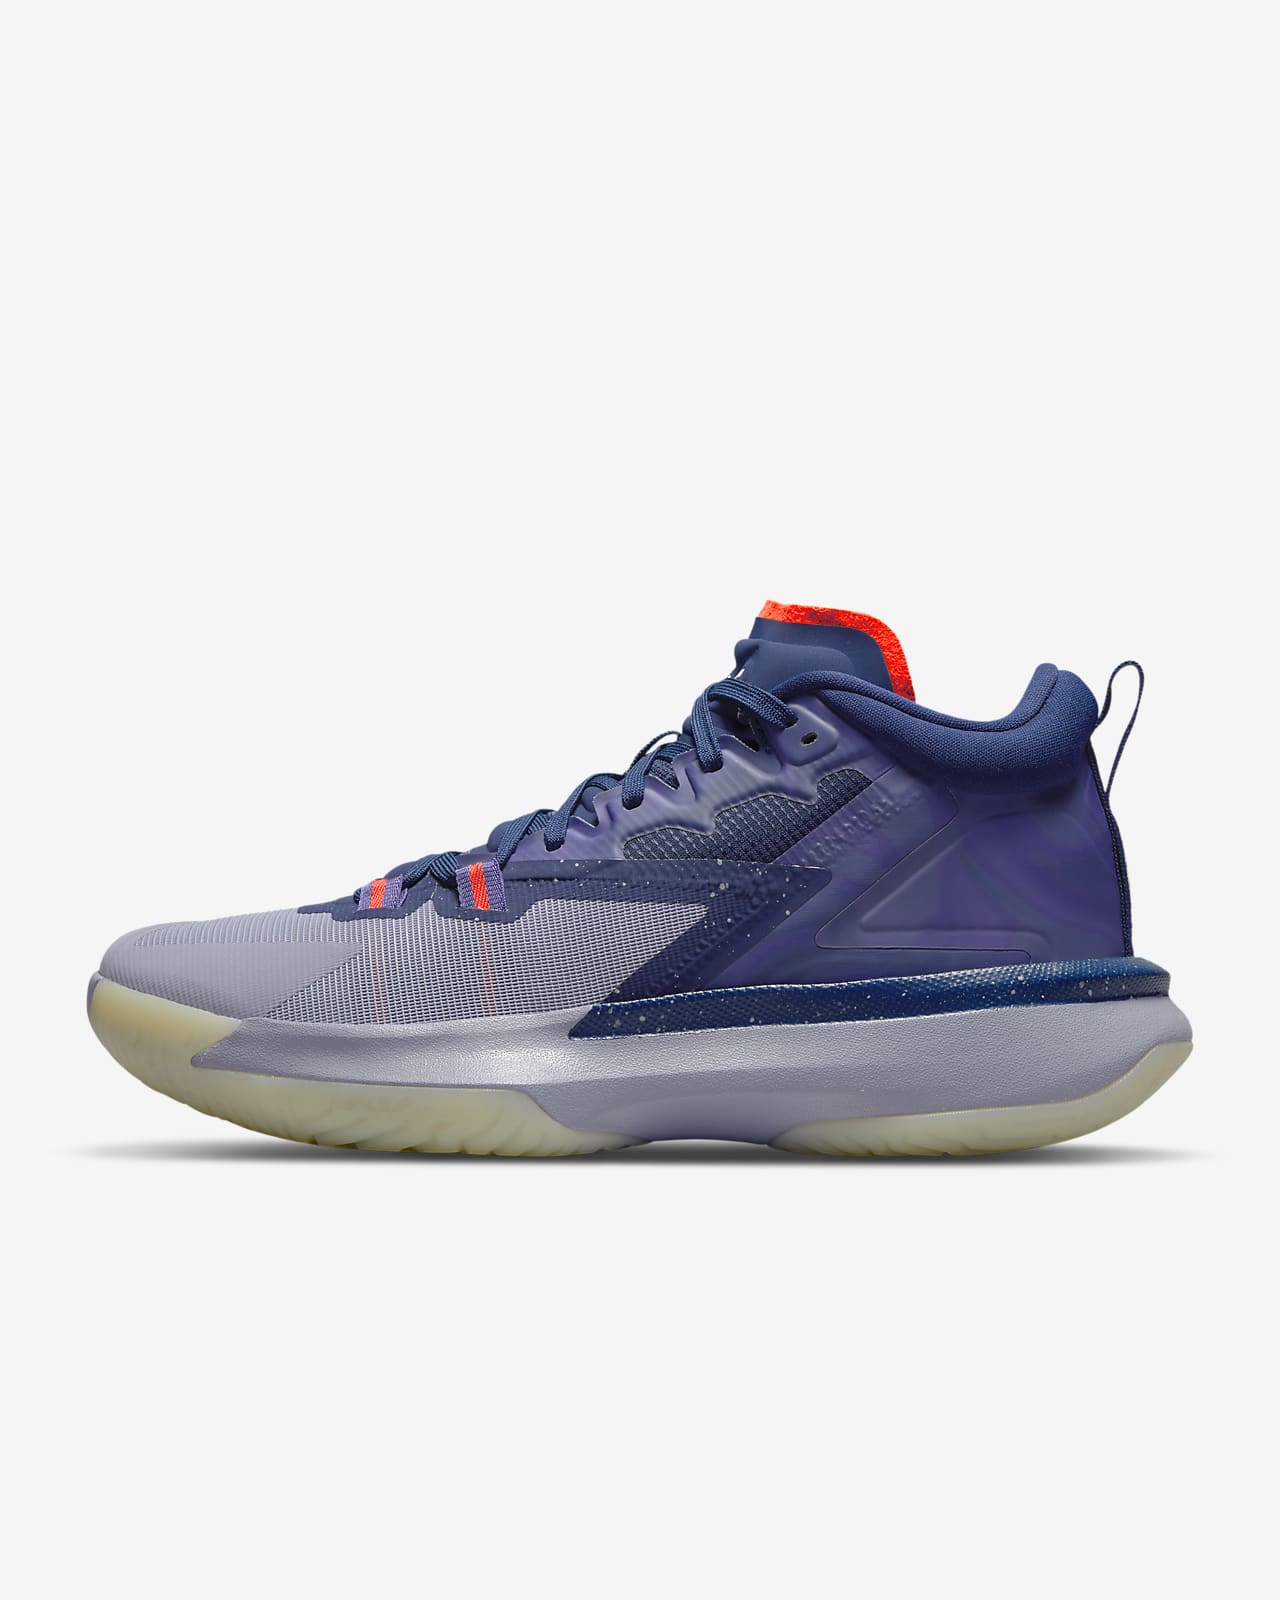 Zion 1 Basketball Shoes